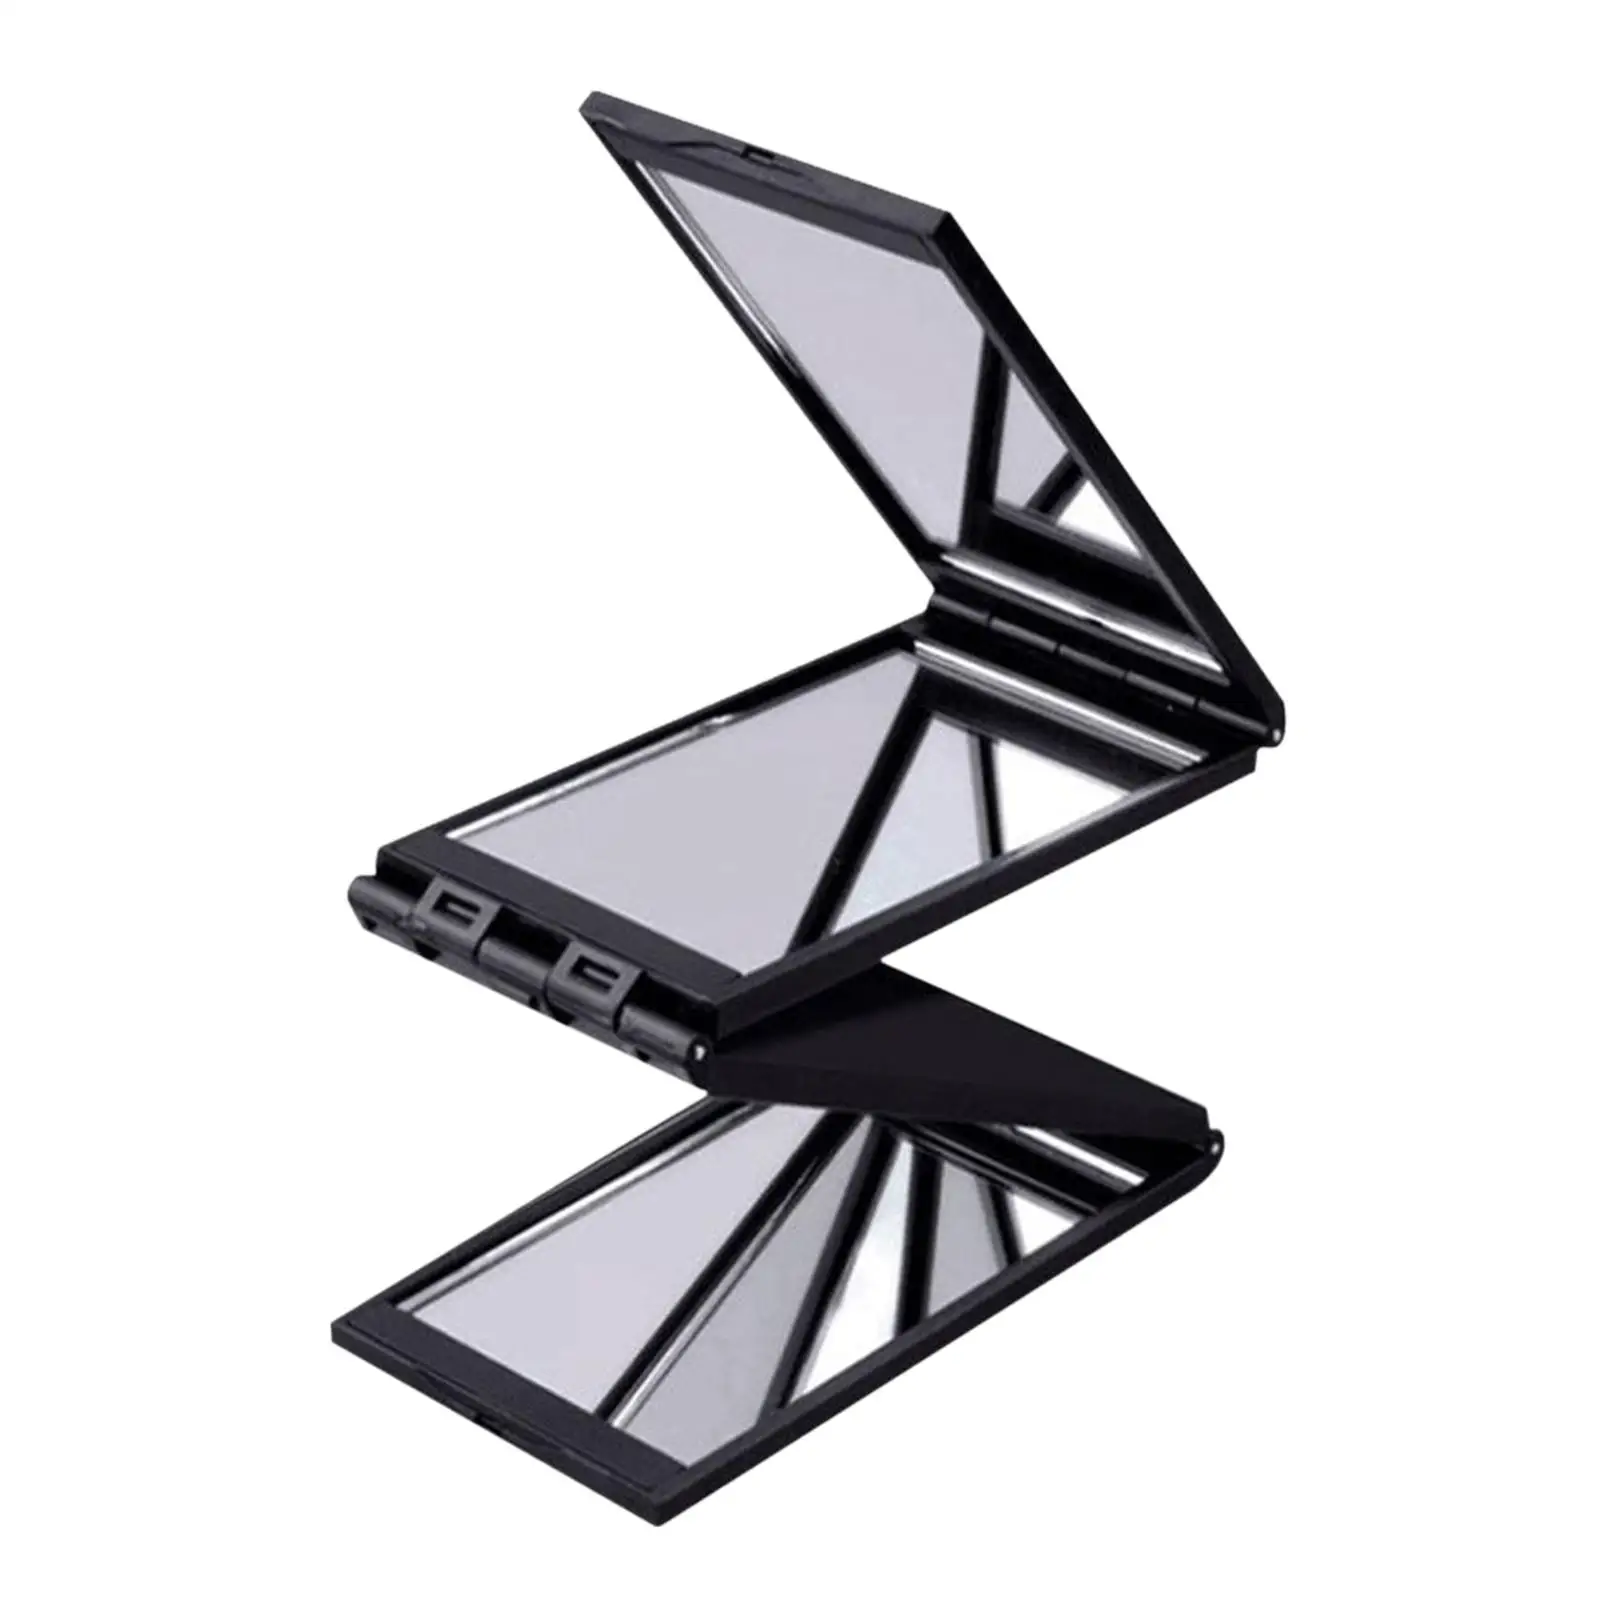 Foldable Makeup Mirror Small Durable Cosmetic Vanity Mirror for Shaving Countertop